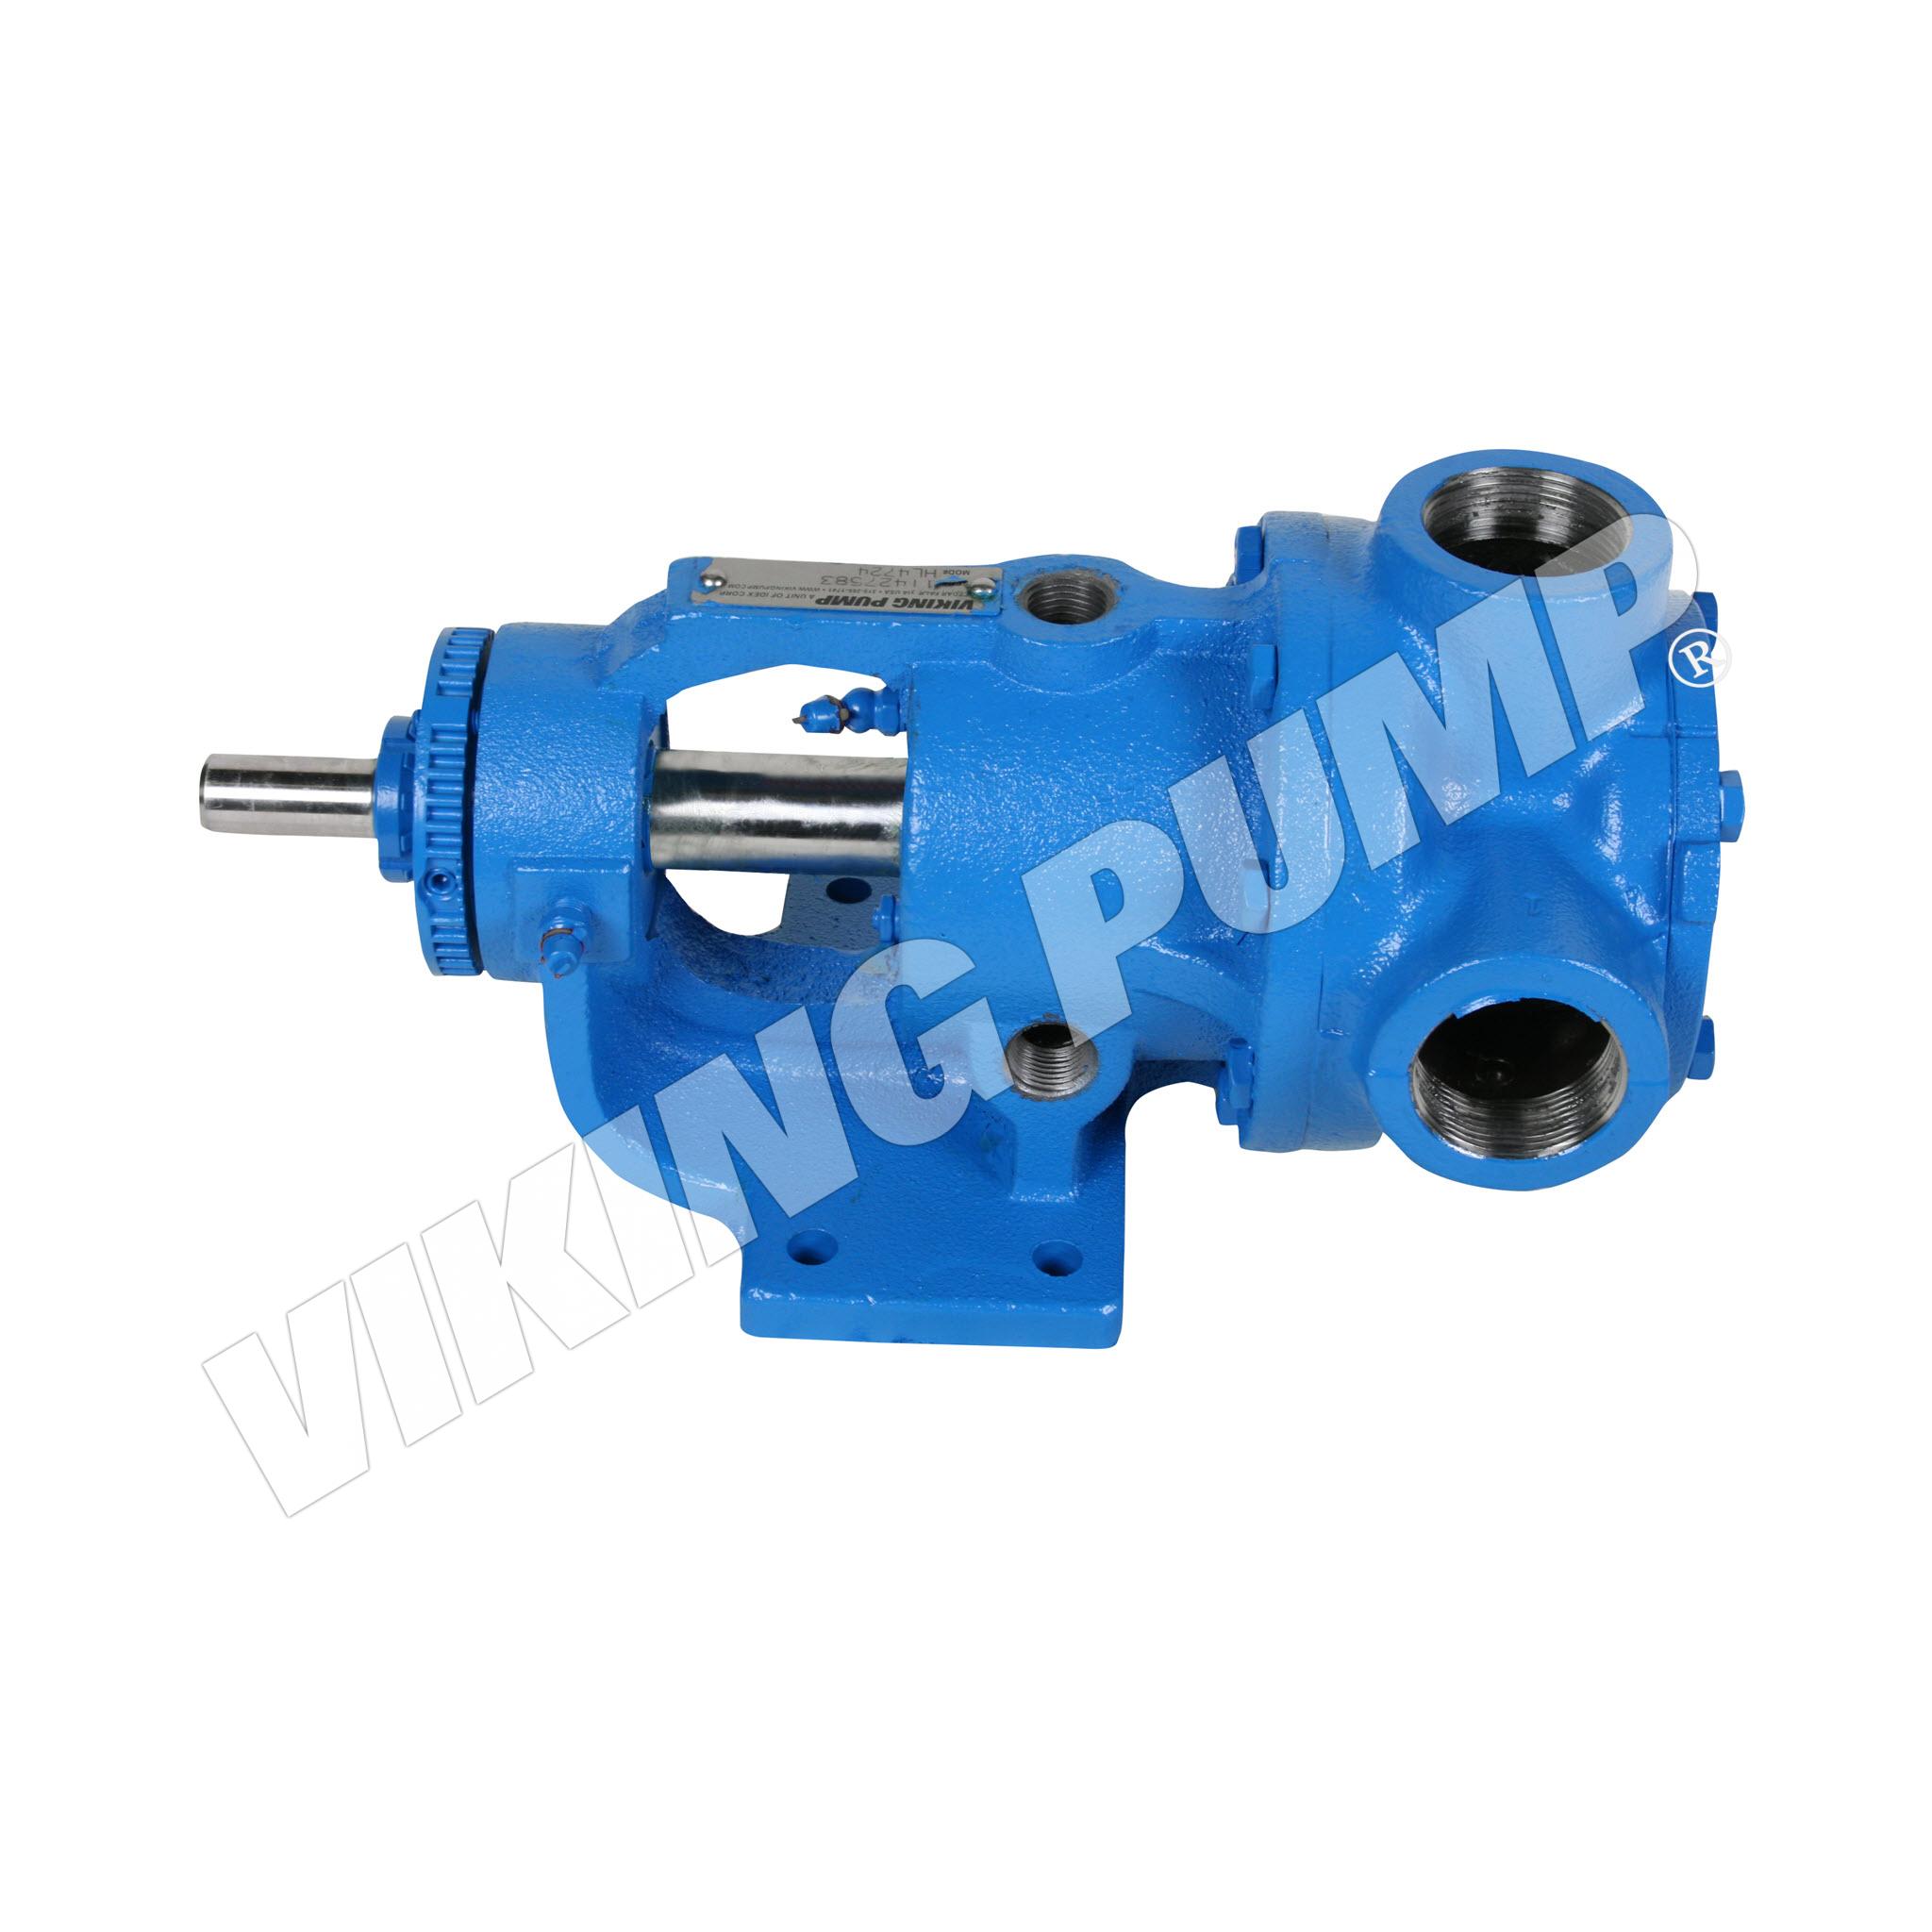 Model HL4724, Mechanical Seal, Foot Mounted, less Relief Valve Pump